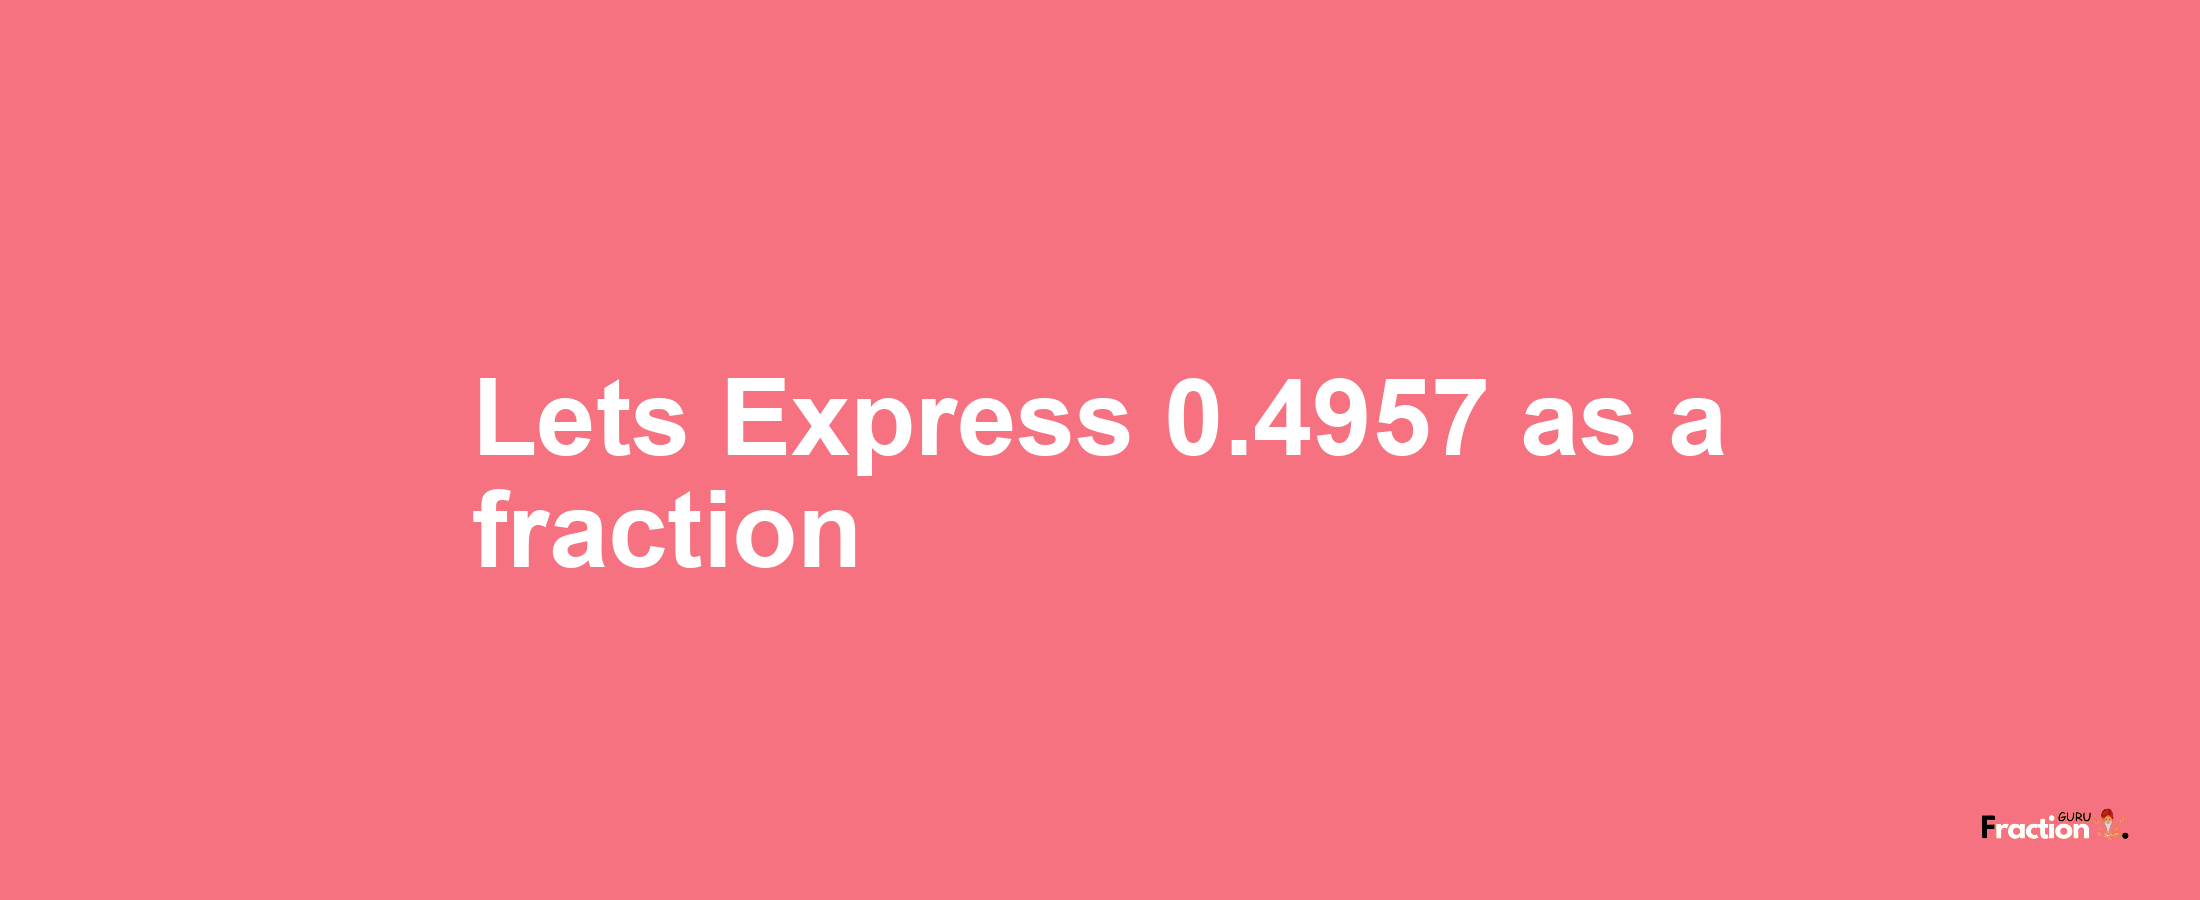 Lets Express 0.4957 as afraction